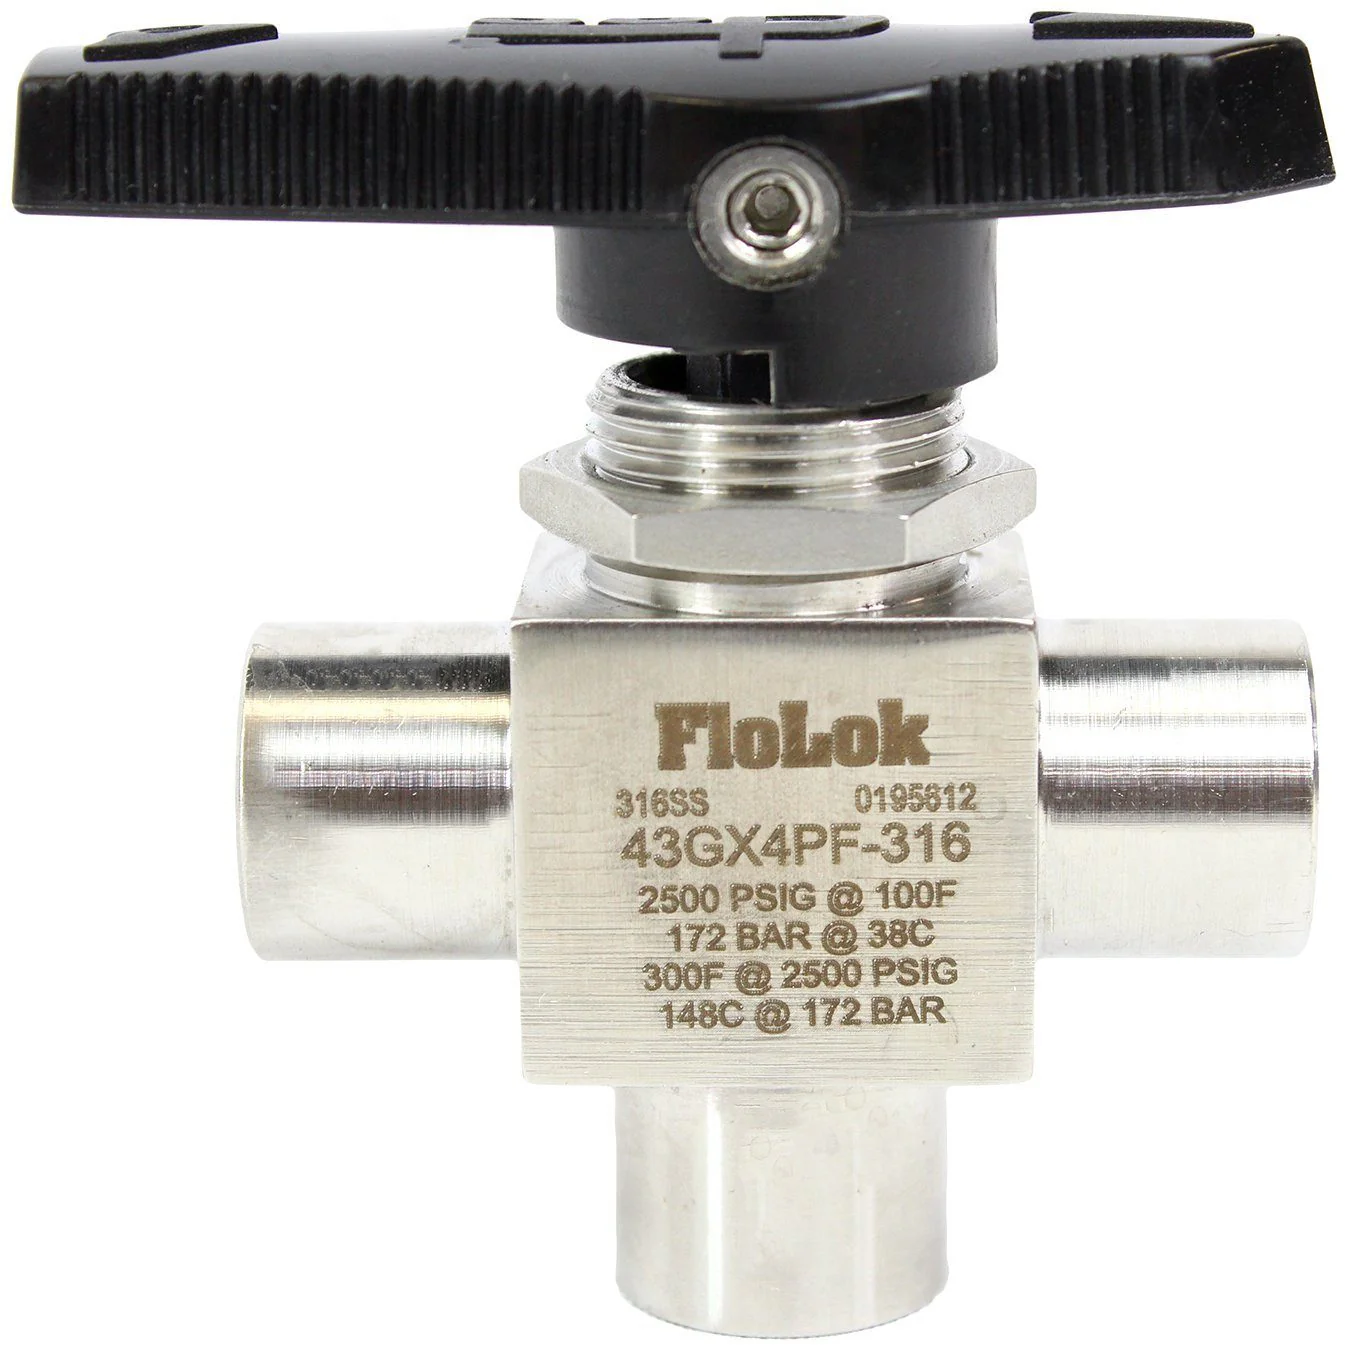 What is the negative temp rating of the flo lok 3 way valve 3/8? Thanks